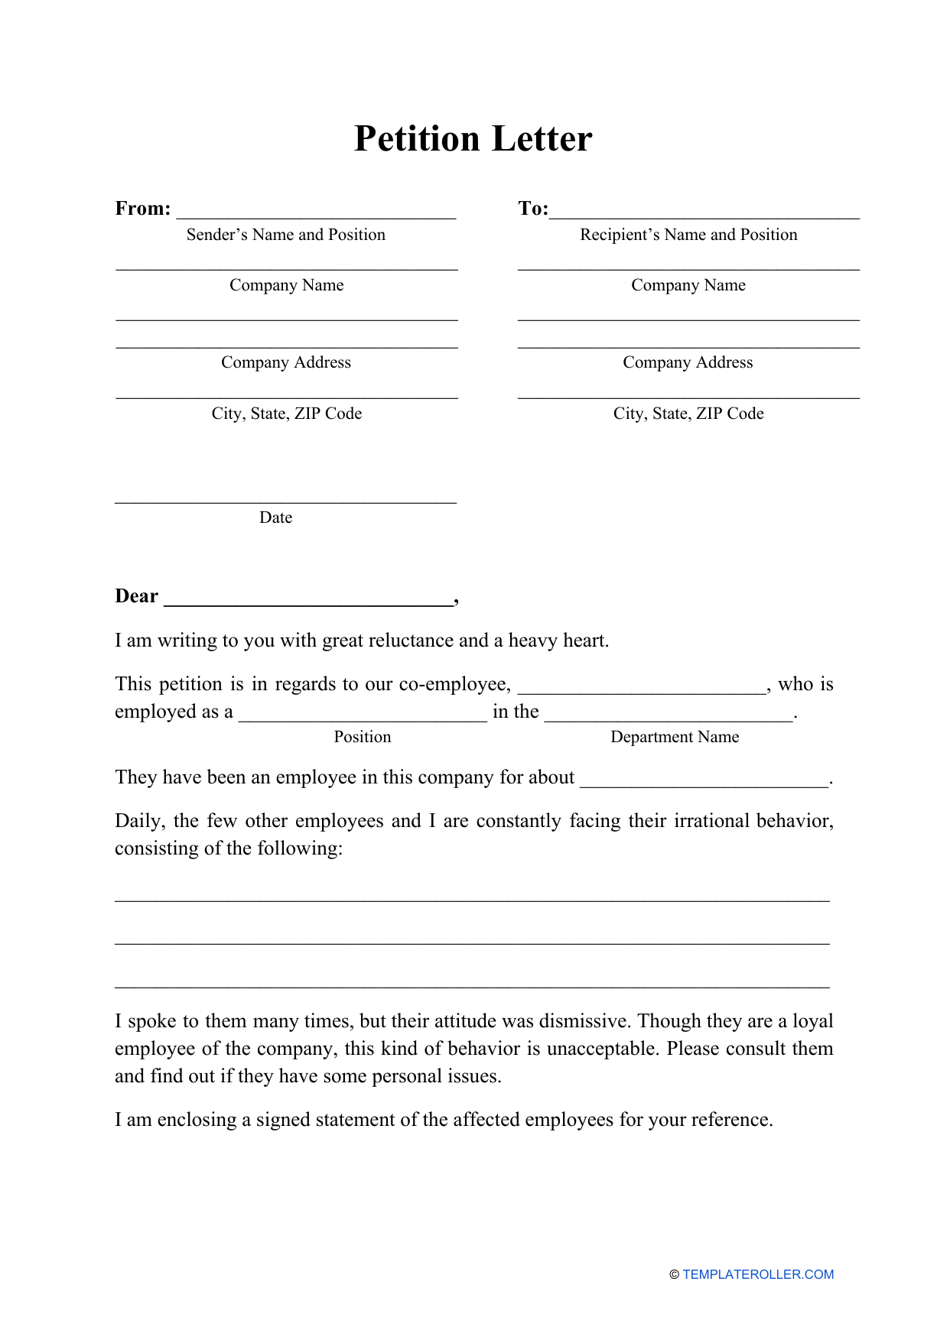 petition-letter-template-download-printable-pdf-templateroller